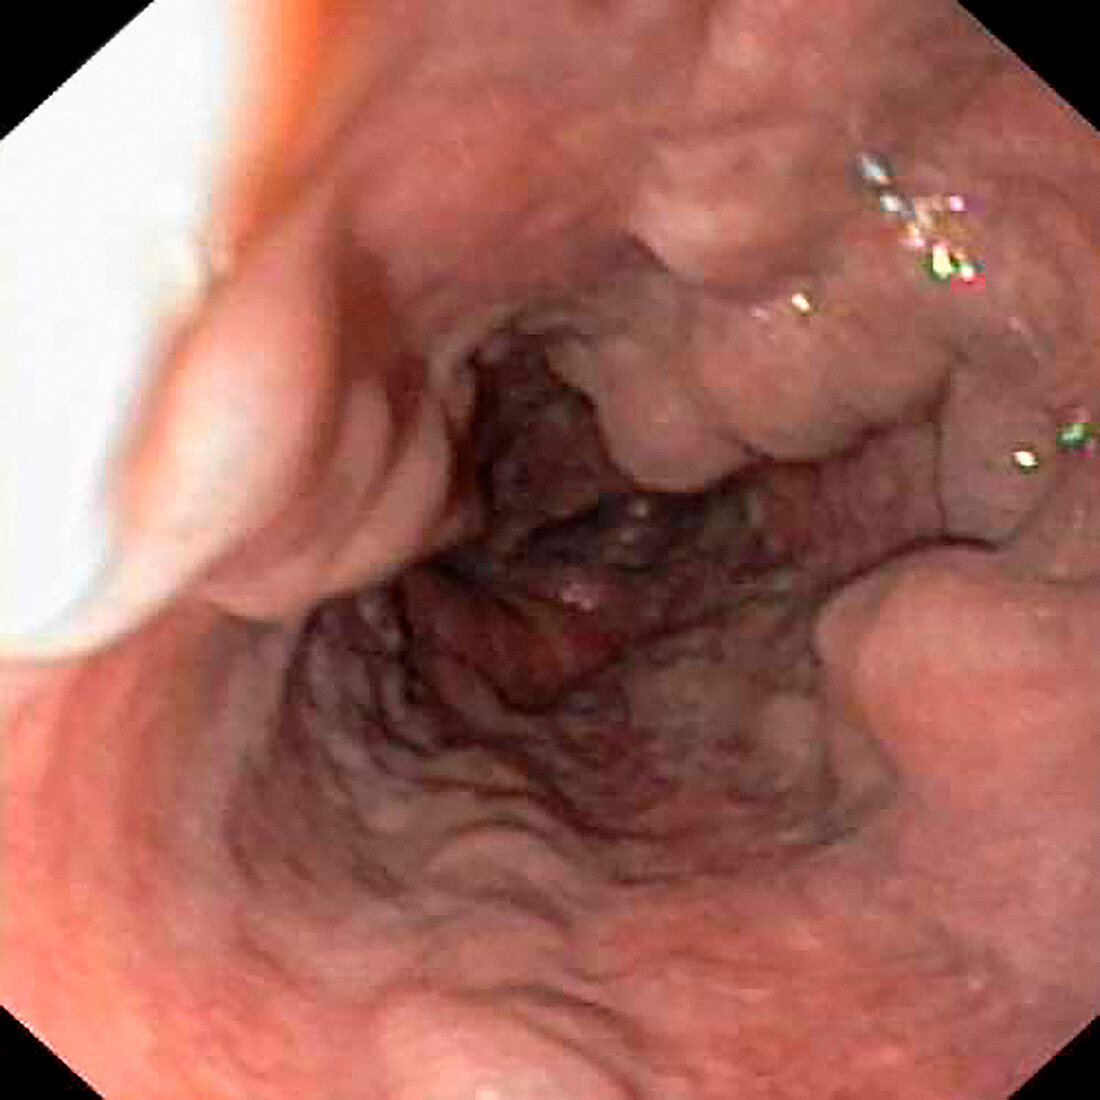 Oesophageal varices